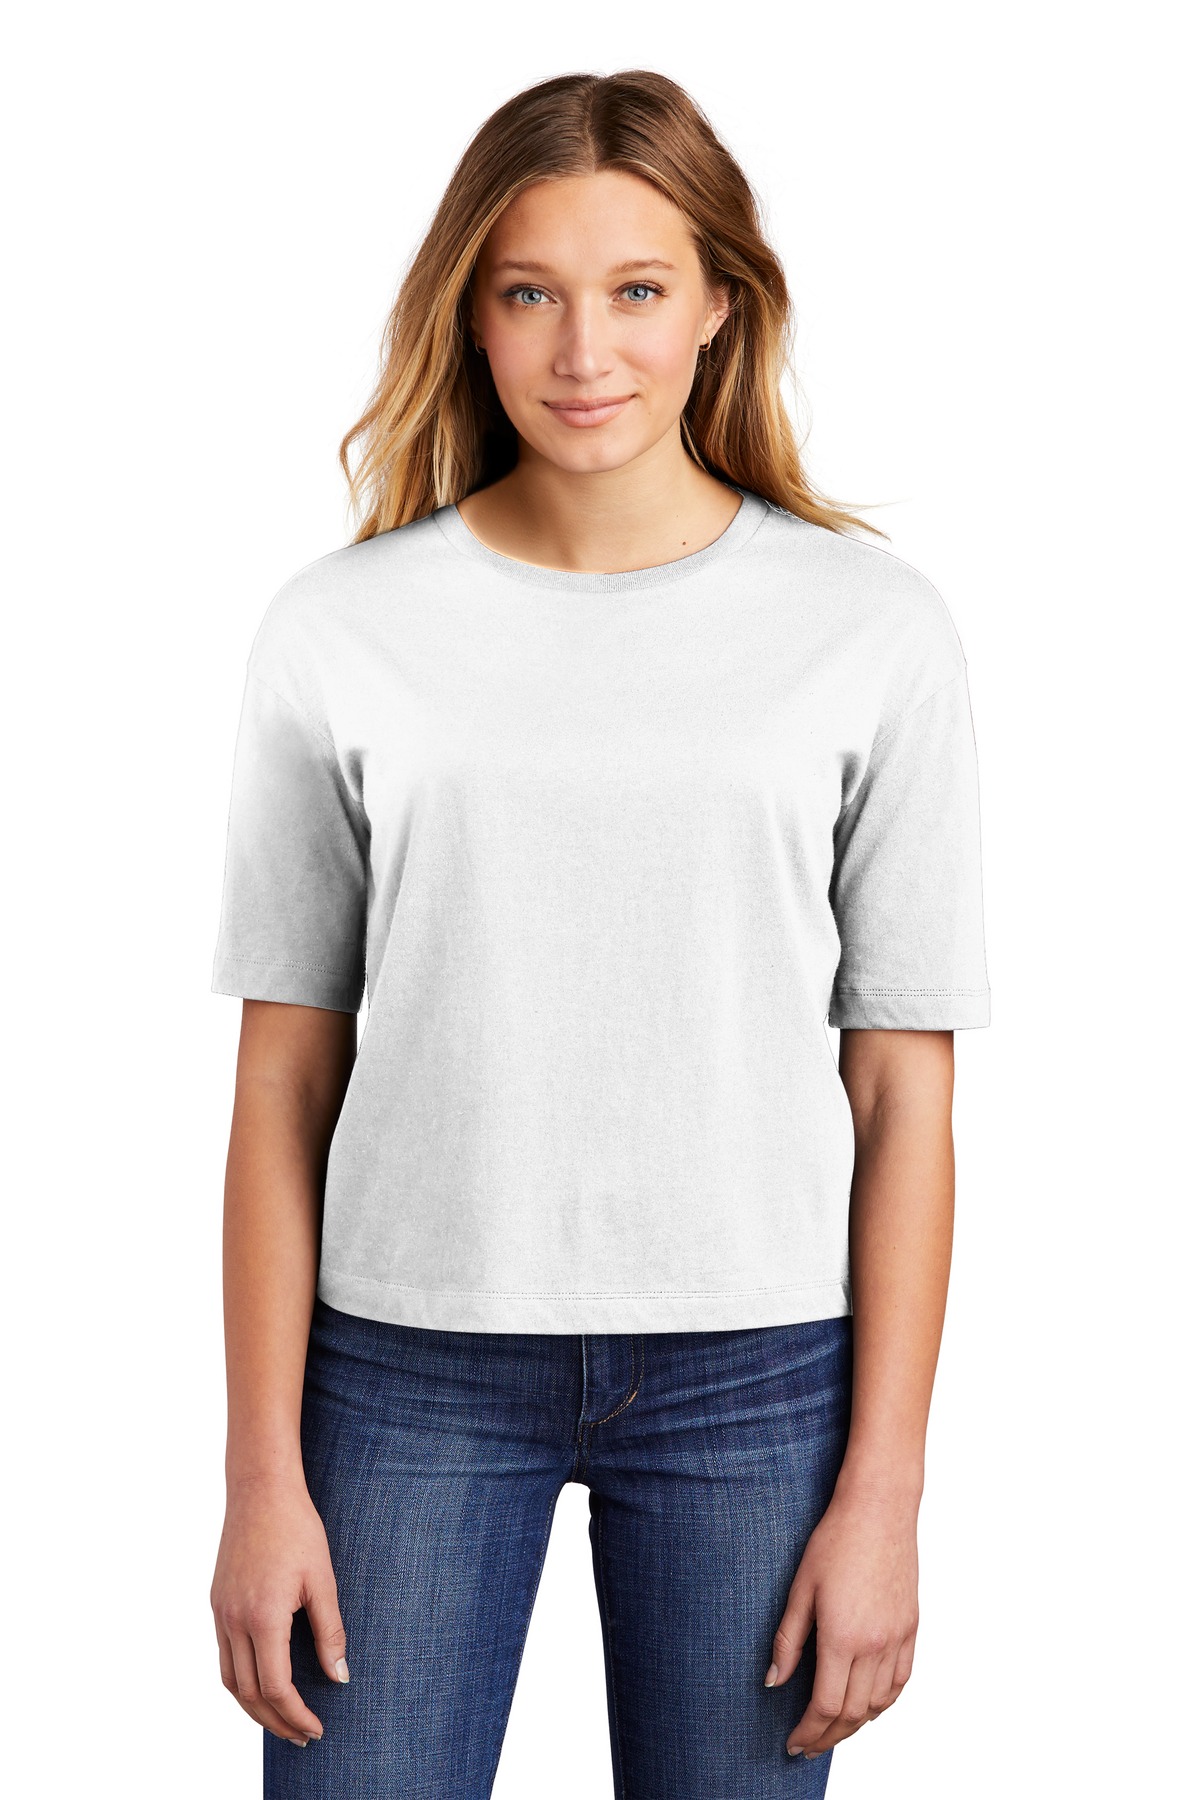 District Women''s V.I.T. Boxy Tee DT6402